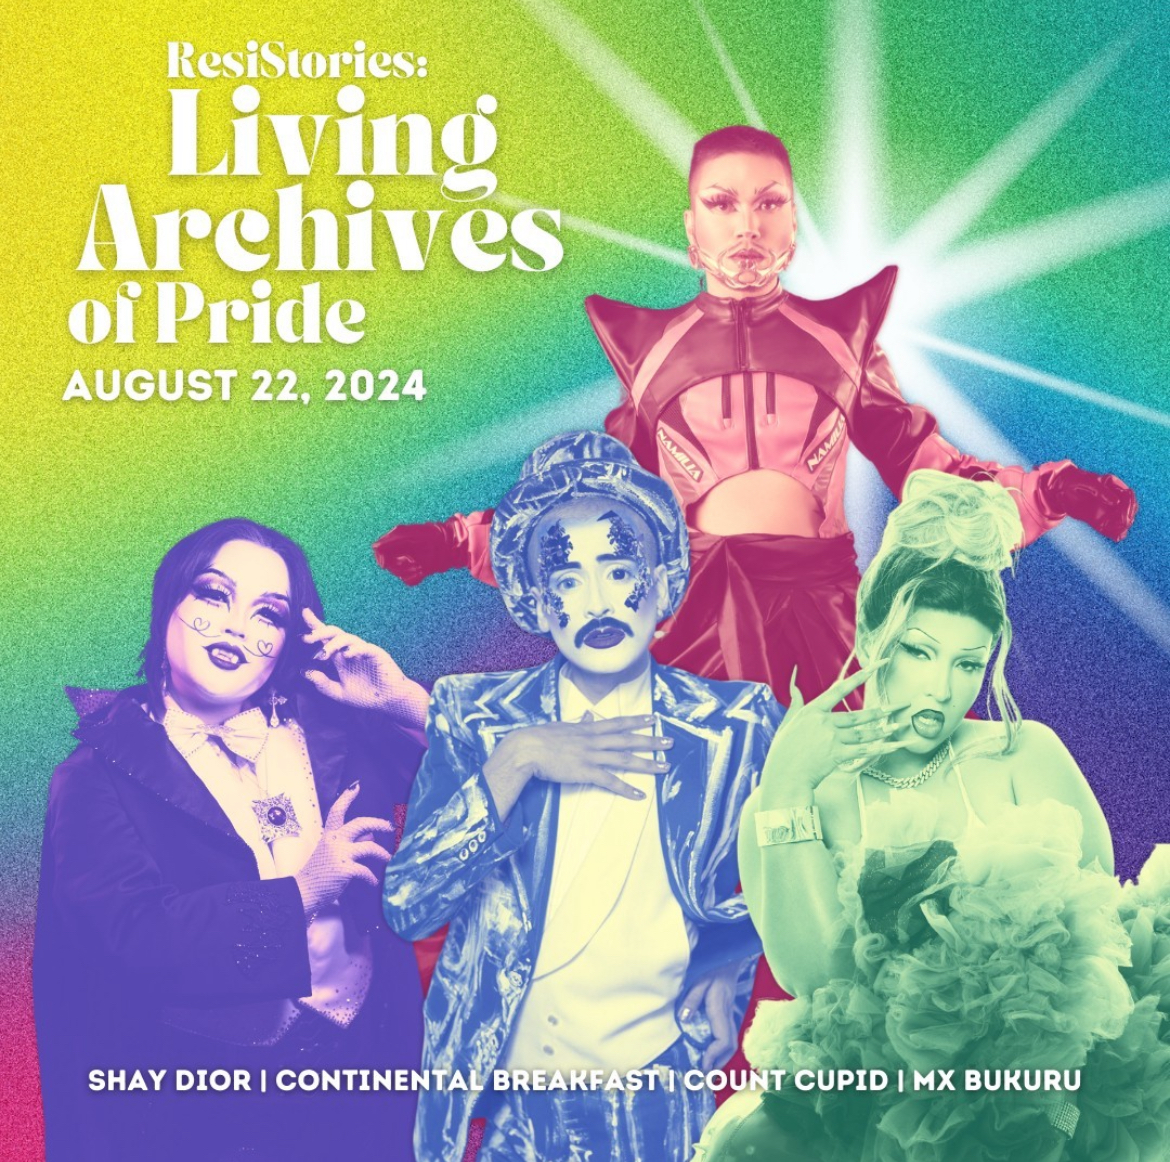 Event poster that reads, "ResiStories: Living Archives of Pride" with the headshots of 4 drag artists on a rainbow background